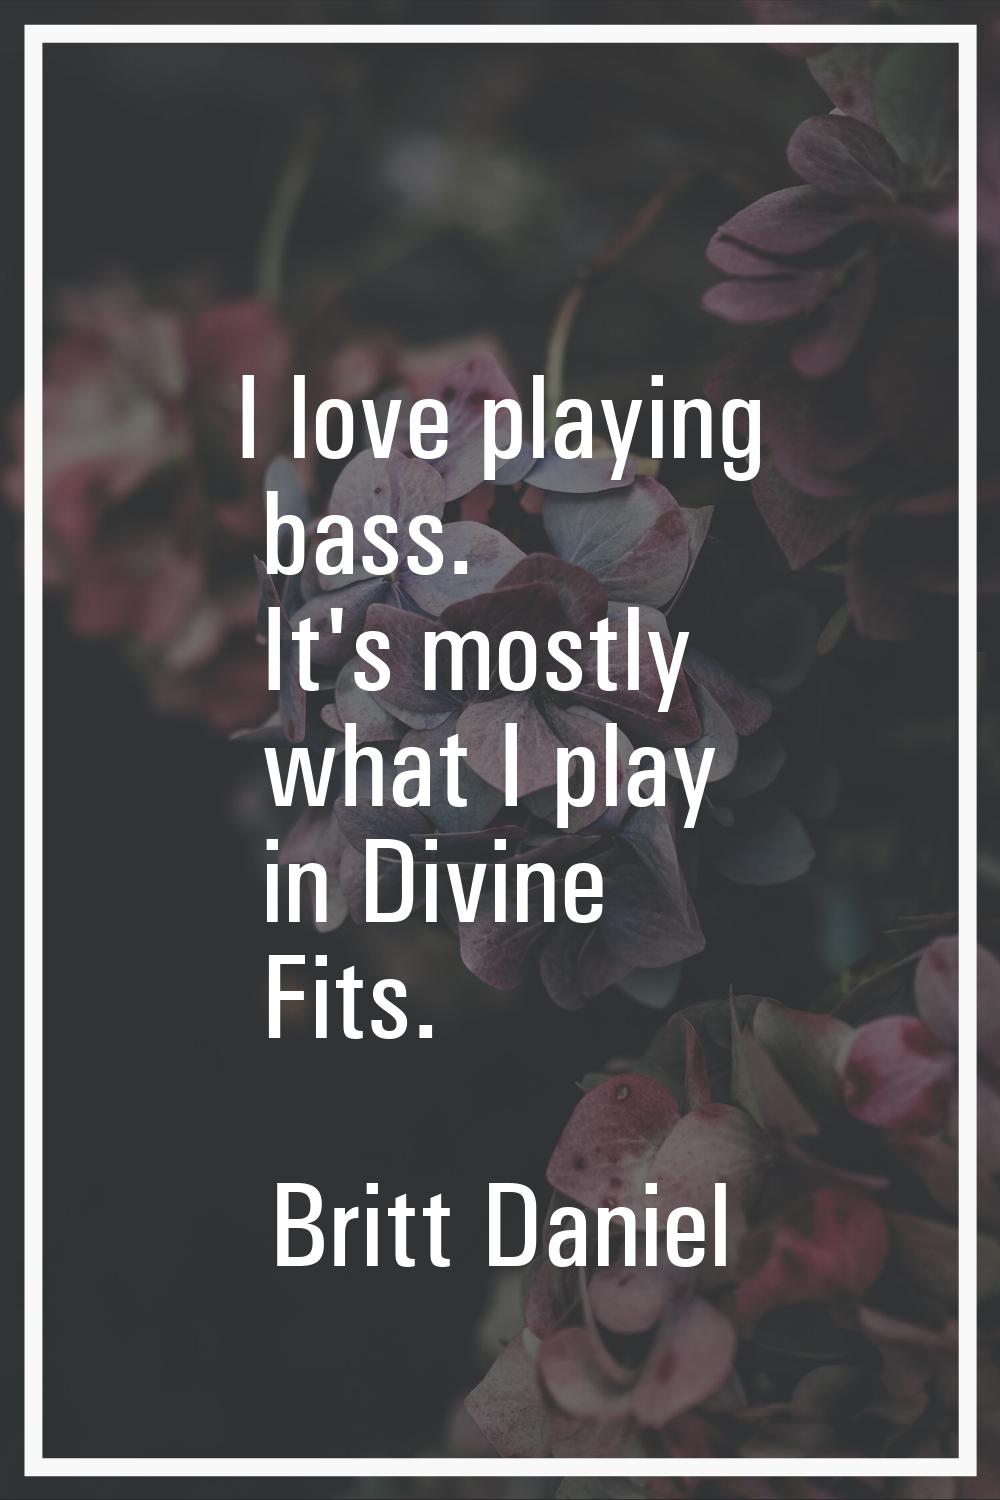 I love playing bass. It's mostly what I play in Divine Fits.